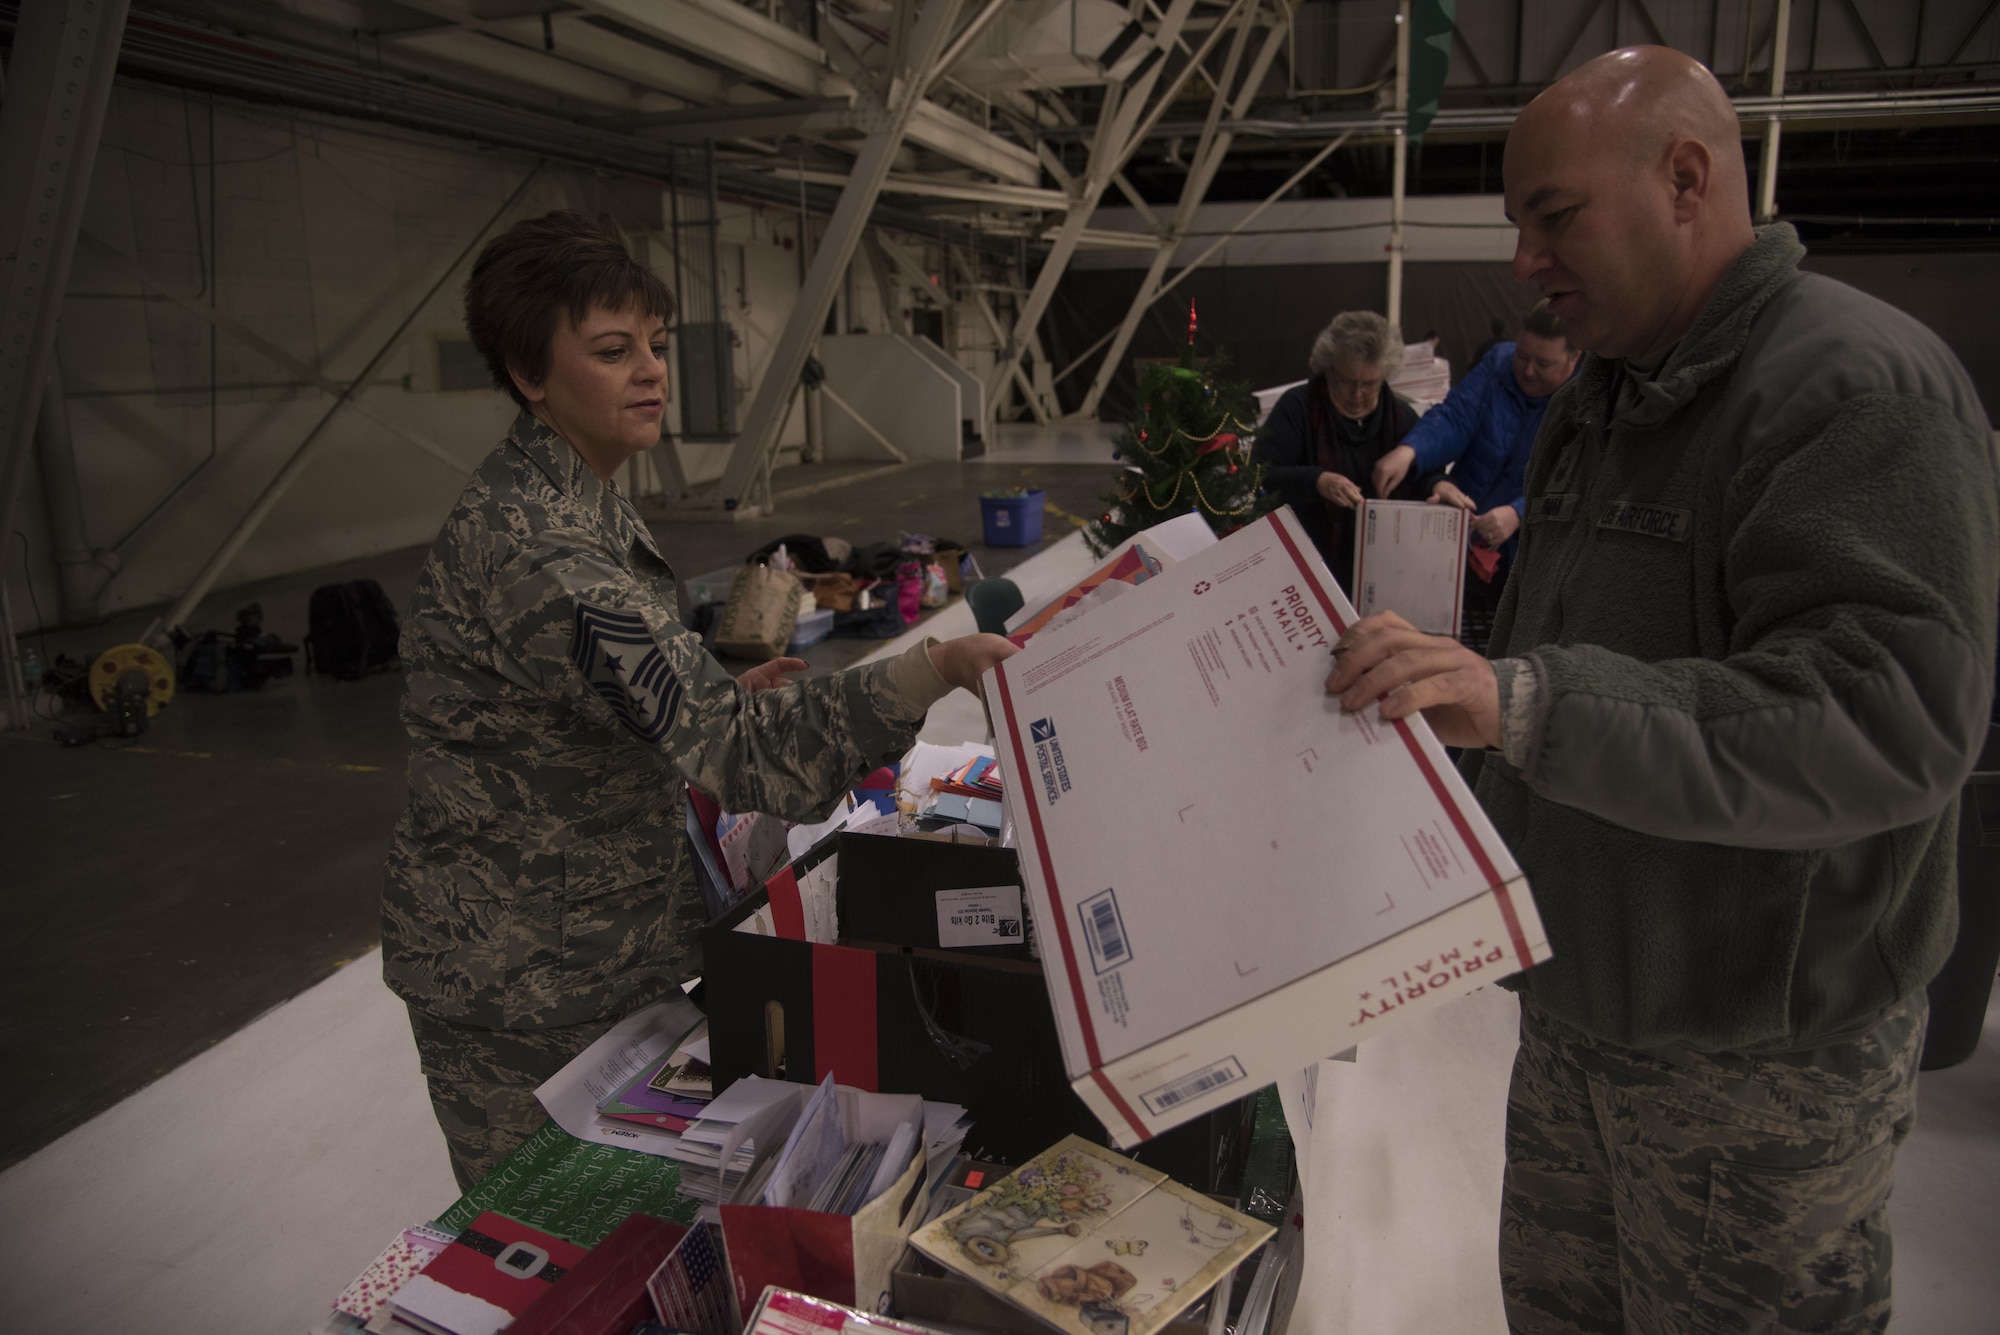 Chief Master Sgt. Shannon Rix, 92nd Air Refueling Wing command chief, and Master Sgt. Nicholas Ehman, 92nd Maintenance Squadron accessories flight assistant flight chief, pack letters into a shipping box Dec. 1, 2016 at Fairchild Air Force Base. Letters and other items were packed into boxes as part of KREM 2 News Treats 2 Troops program. Treats 2 Troops is a program that allows people to support deployed military members. (U.S. Air Force photo/Senior Airman Nick J. Daniello)